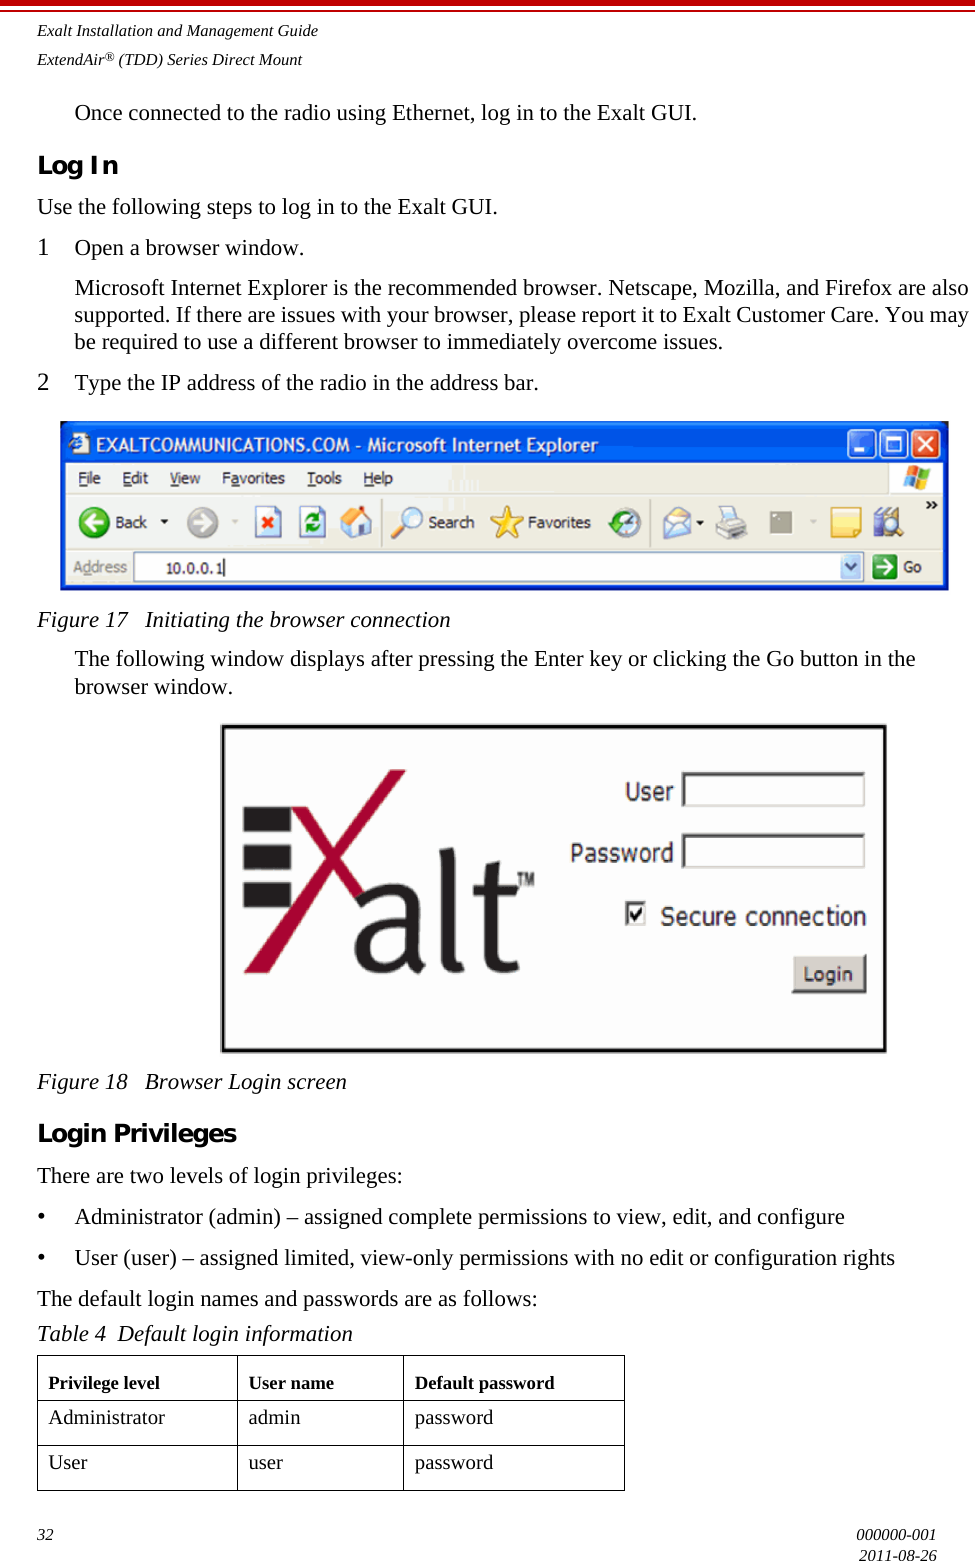 Exalt Installation and Management GuideExtendAir® (TDD) Series Direct Mount32 000000-0012011-08-26Once connected to the radio using Ethernet, log in to the Exalt GUI.Log InUse the following steps to log in to the Exalt GUI.1Open a browser window. Microsoft Internet Explorer is the recommended browser. Netscape, Mozilla, and Firefox are also supported. If there are issues with your browser, please report it to Exalt Customer Care. You may be required to use a different browser to immediately overcome issues.2Type the IP address of the radio in the address bar.Figure 17   Initiating the browser connectionThe following window displays after pressing the Enter key or clicking the Go button in the browser window.Figure 18   Browser Login screenLogin PrivilegesThere are two levels of login privileges:•Administrator (admin) – assigned complete permissions to view, edit, and configure•User (user) – assigned limited, view-only permissions with no edit or configuration rightsThe default login names and passwords are as follows:Table 4  Default login informationPrivilege level User name Default passwordAdministrator admin passwordUser user password